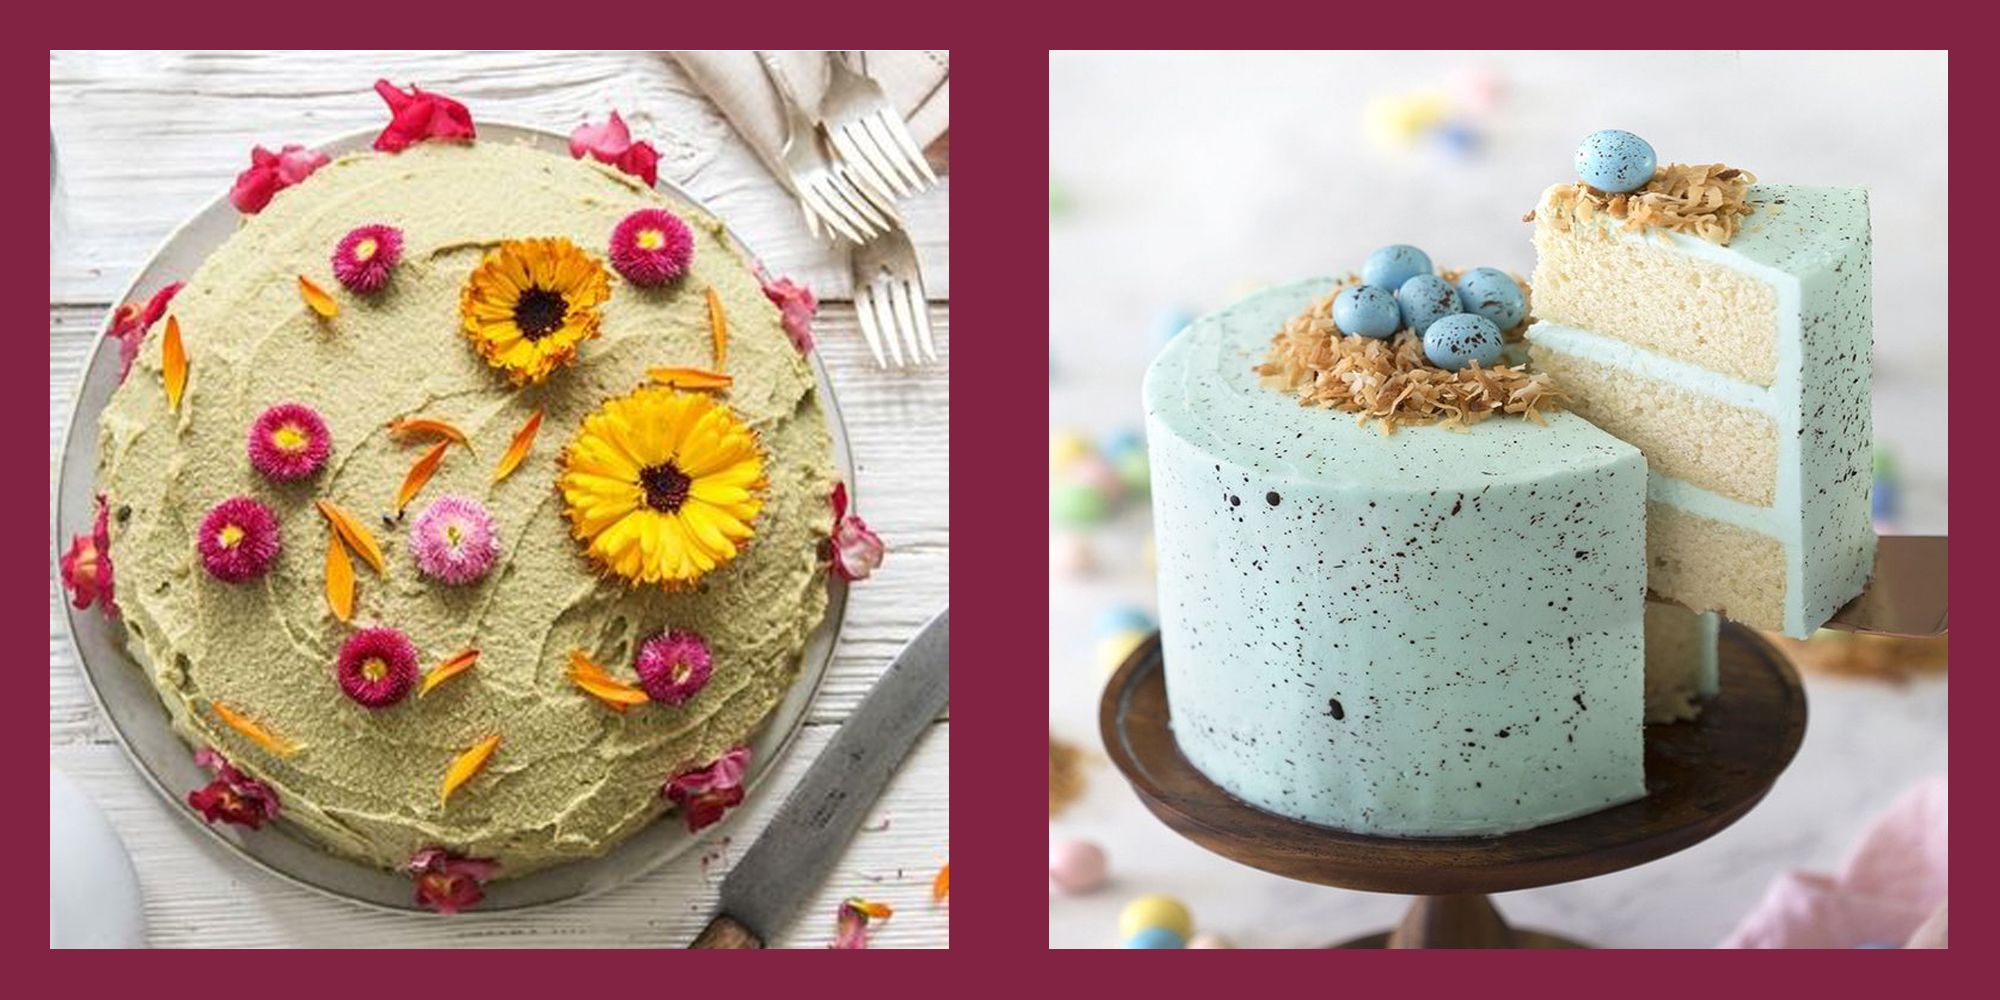 30+ Creative Easter Cake Ideas - Best Recipes For Easter Cakes